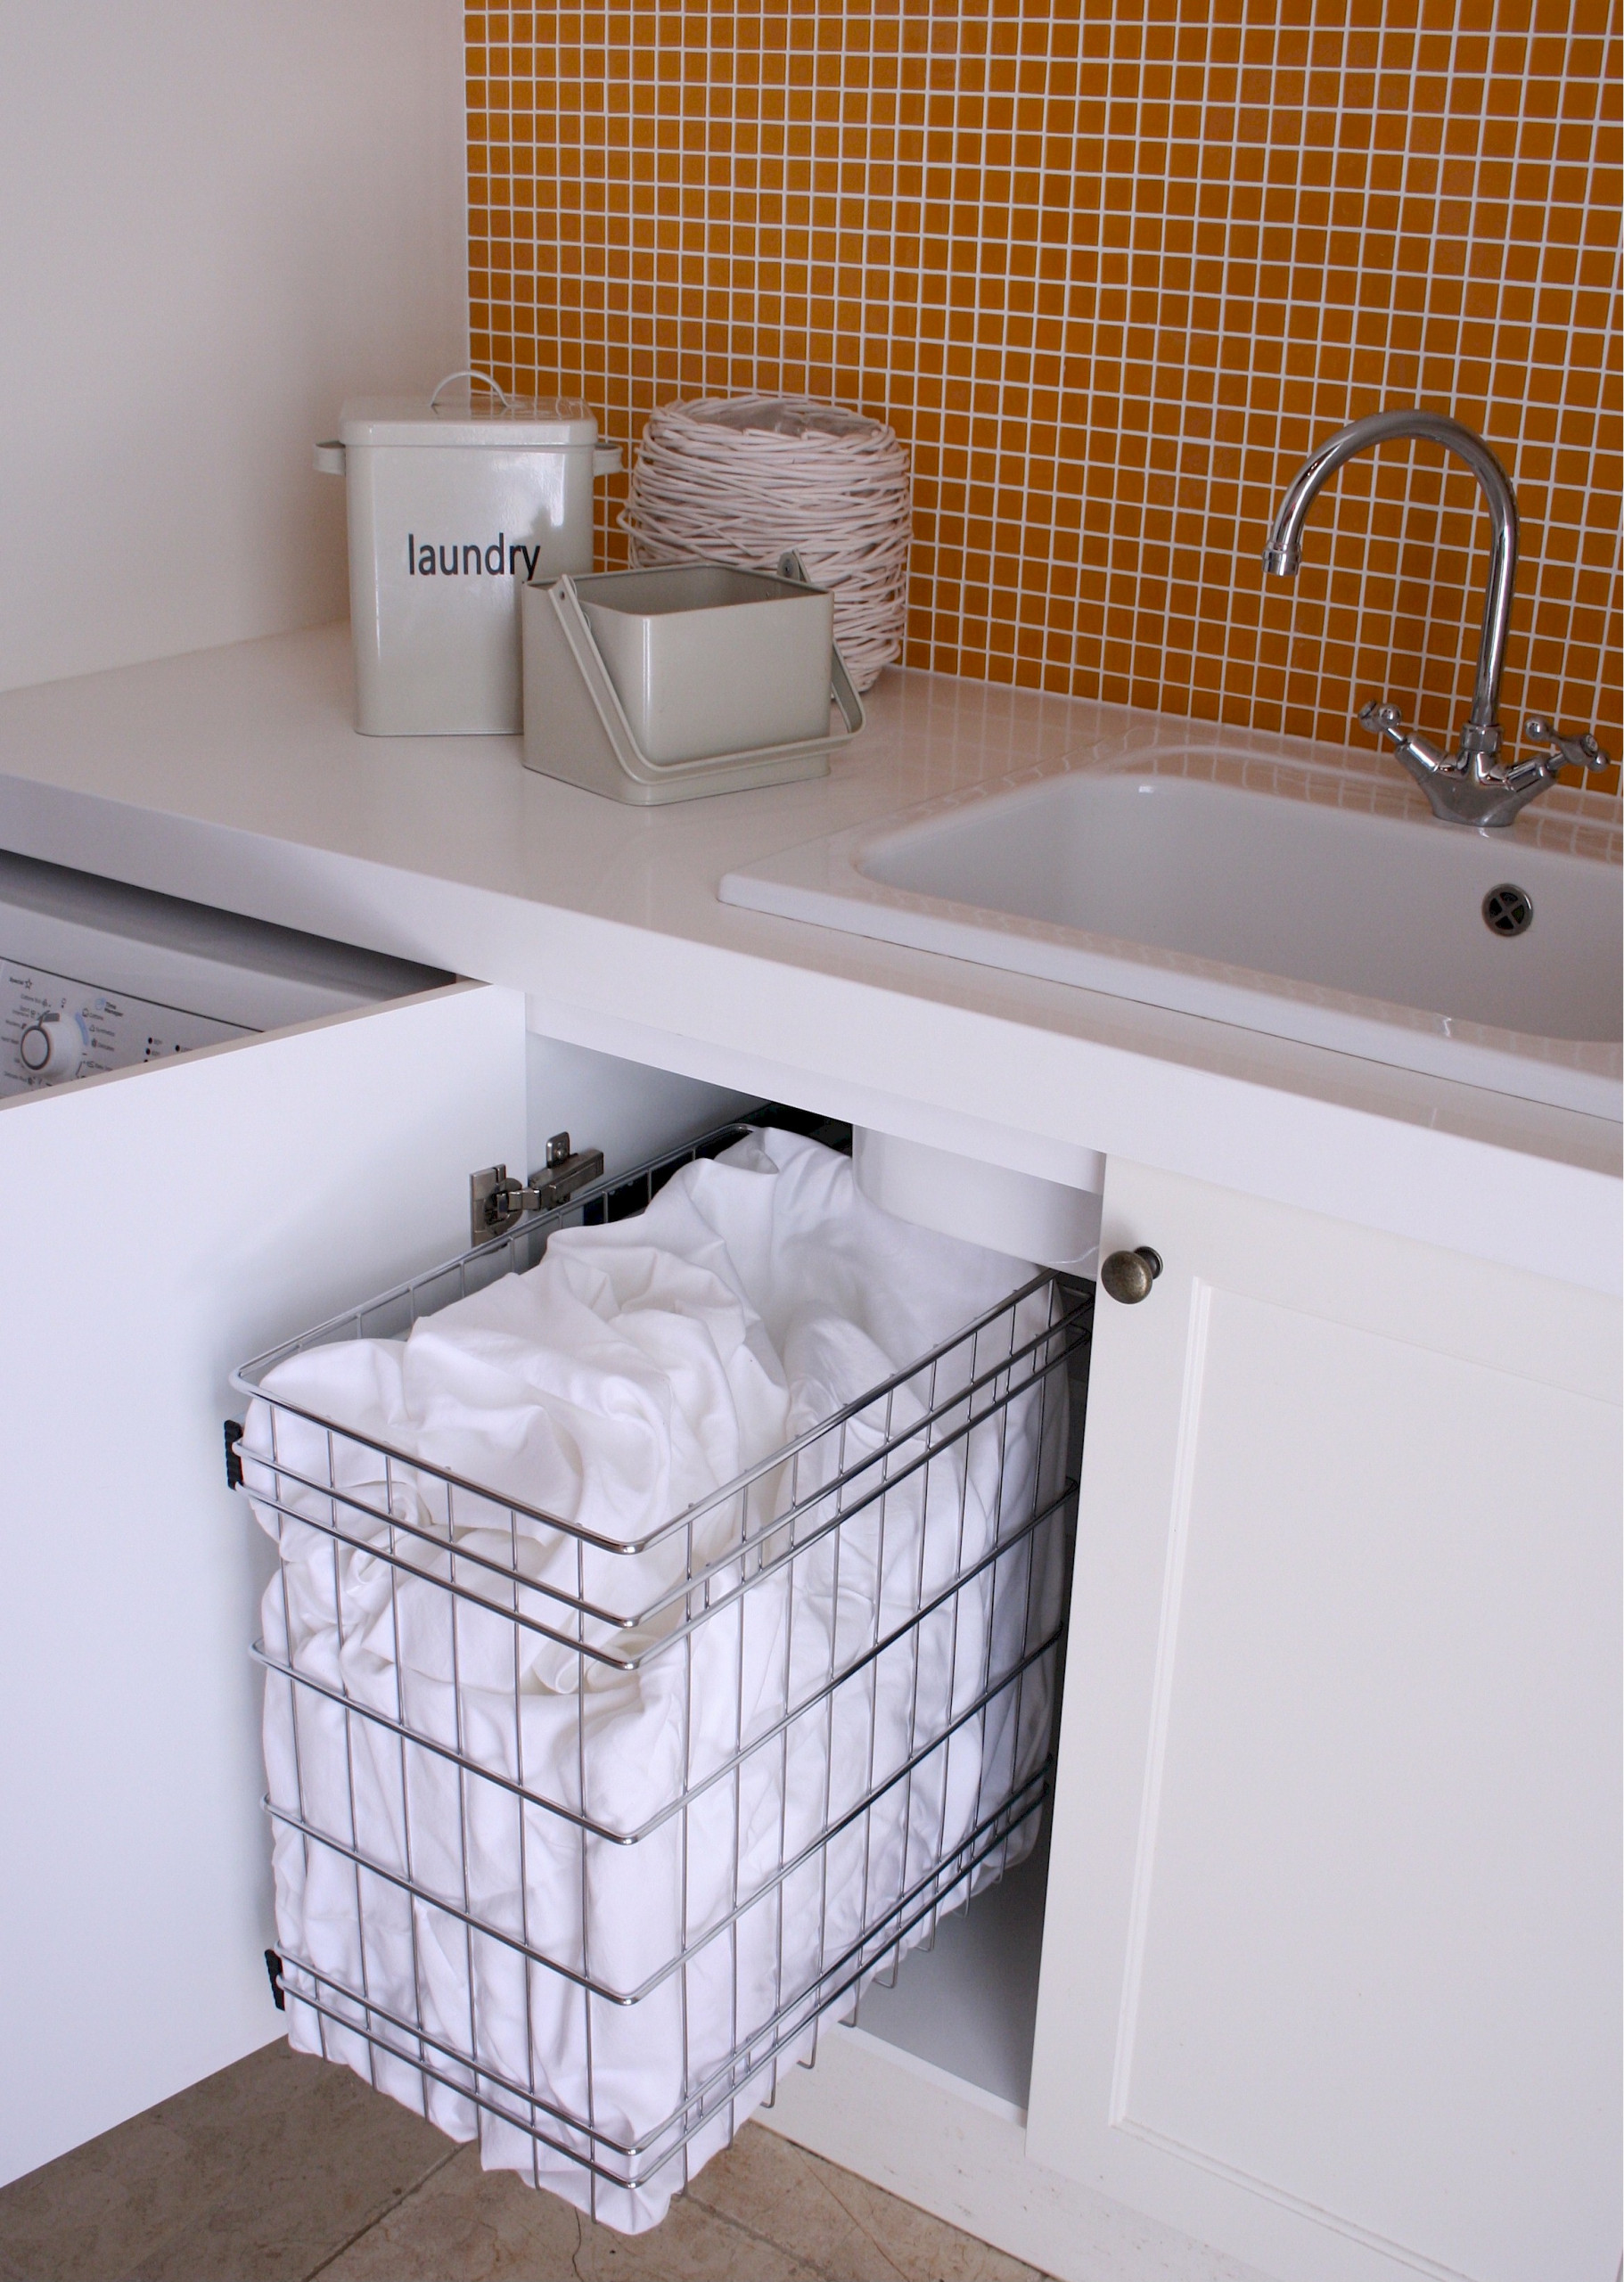 Pull Out Laundry Basket - Photos & Ideas | Houzz